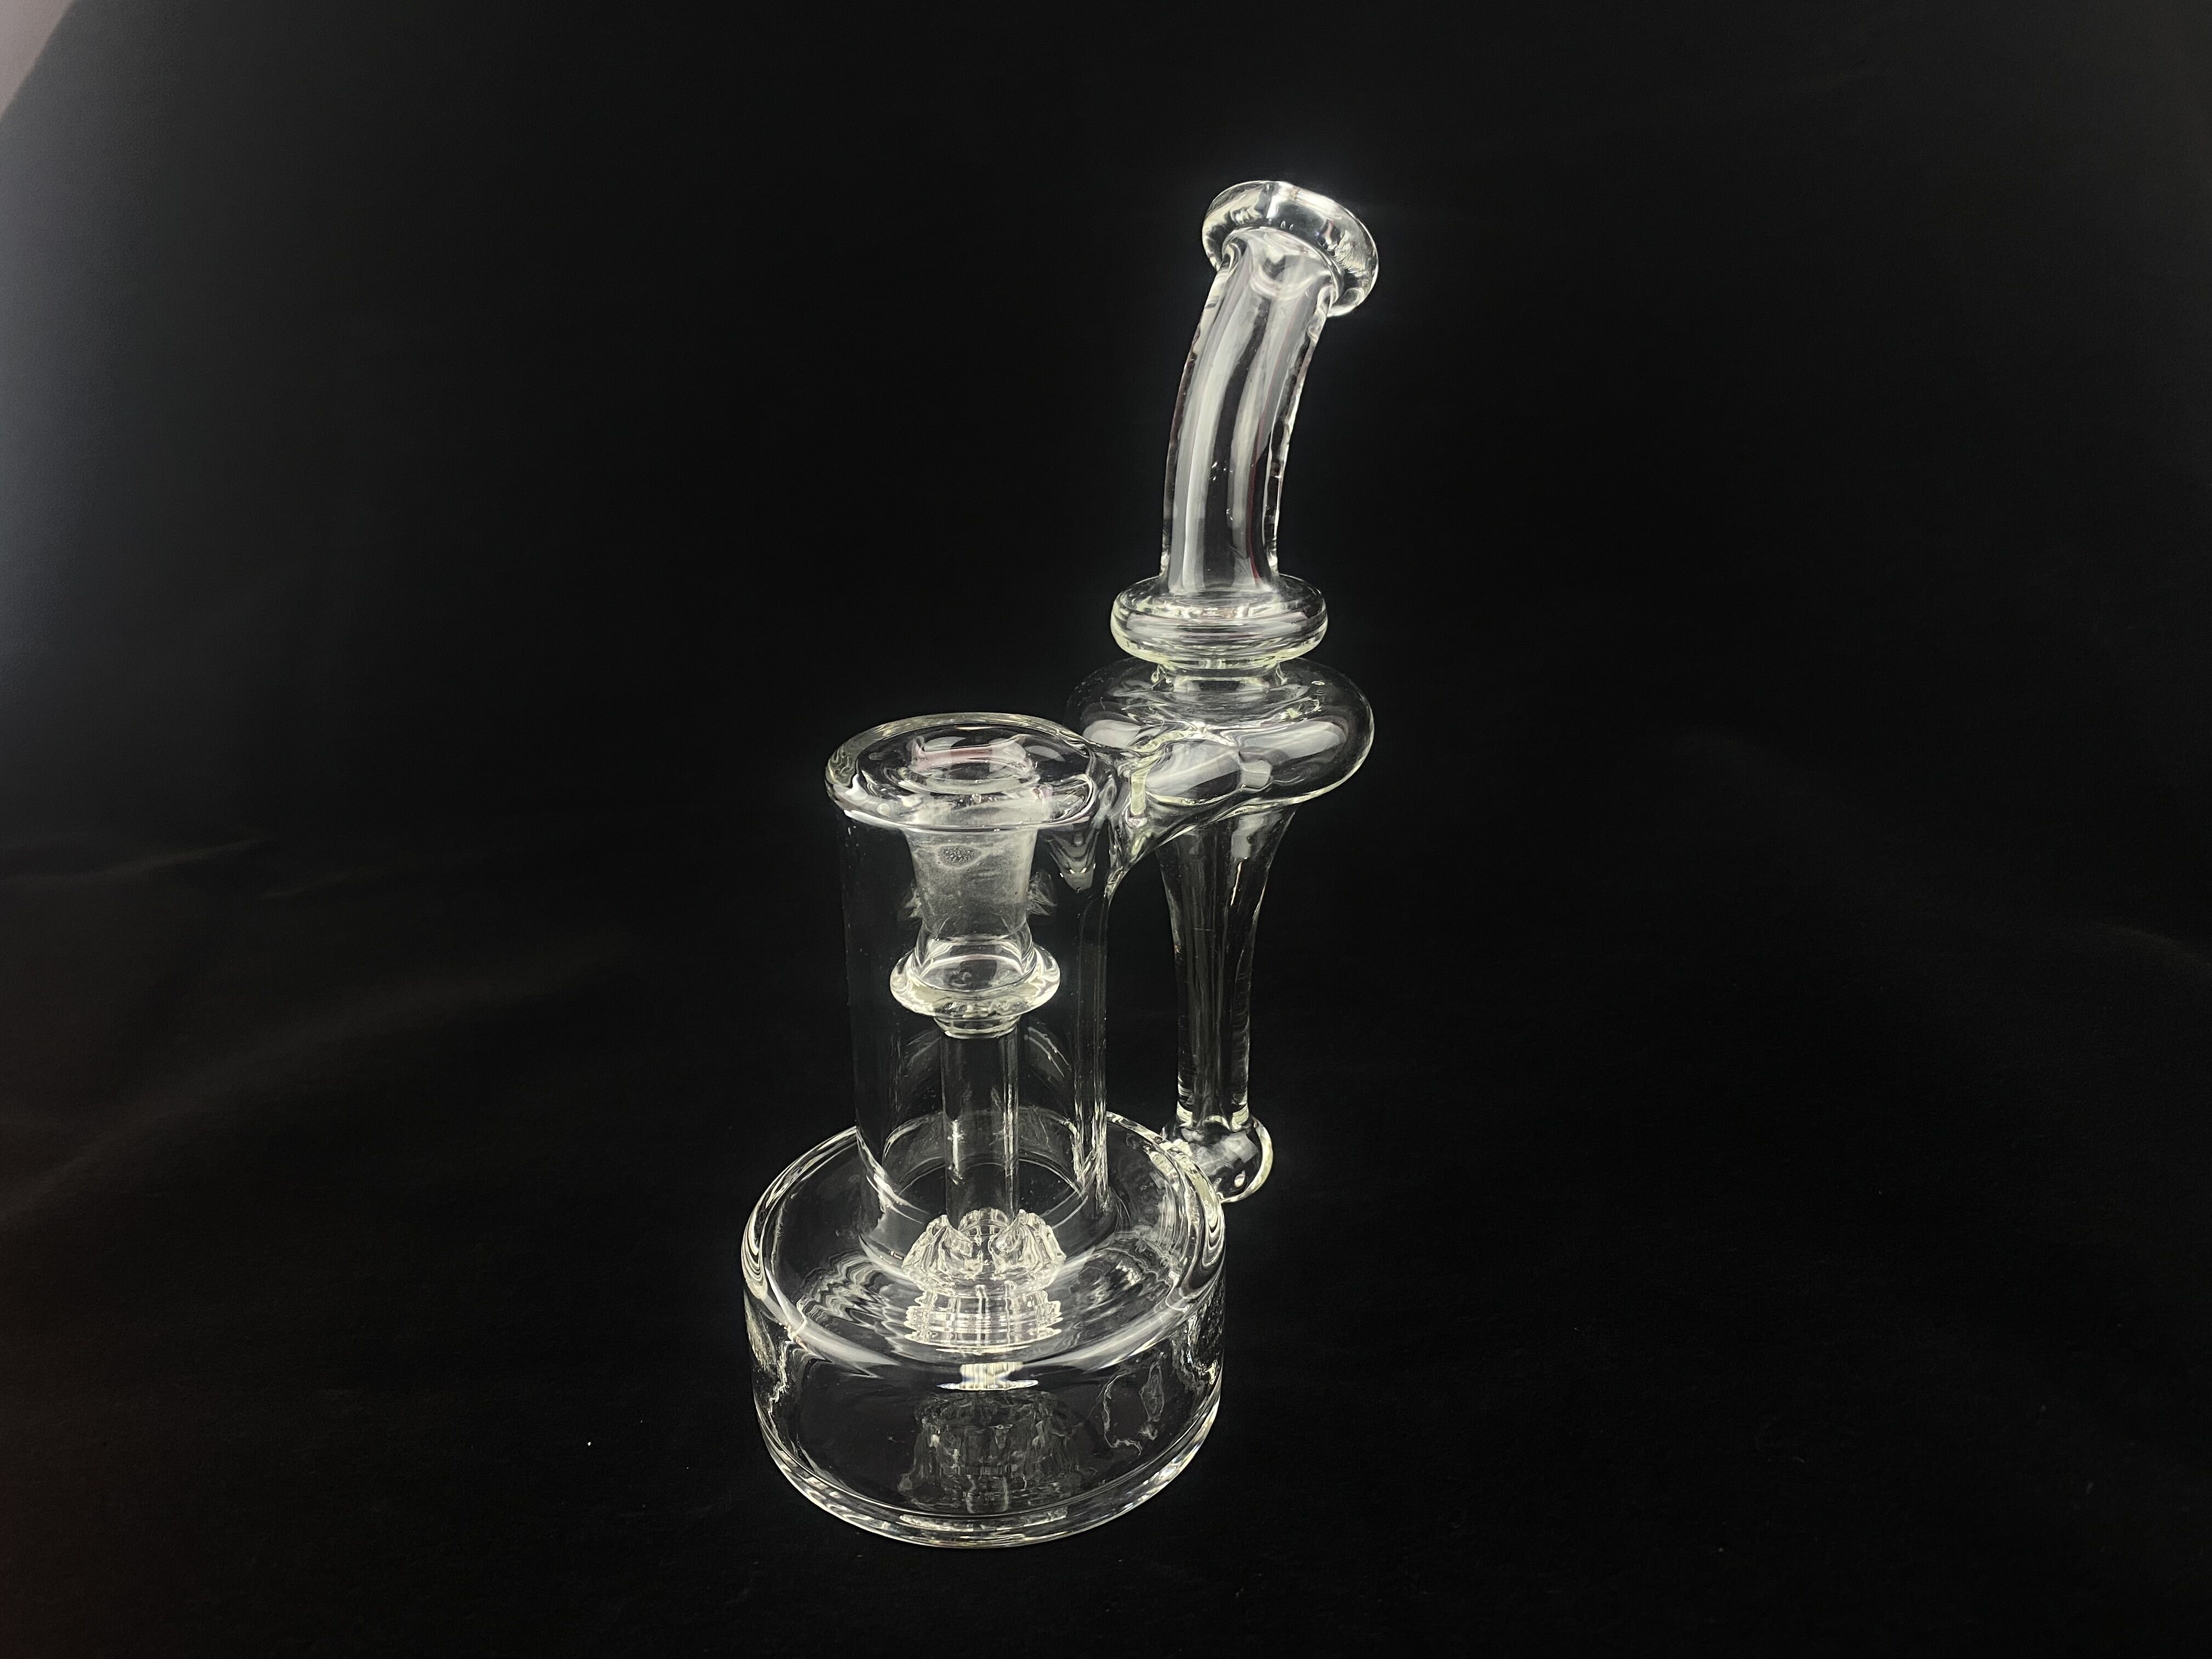 

Smoking Pipes,rbr2.0,recycle,High artistic and collection value Glass Recycler Bong 14mm rig Independent design factory supplies wholesale and retail